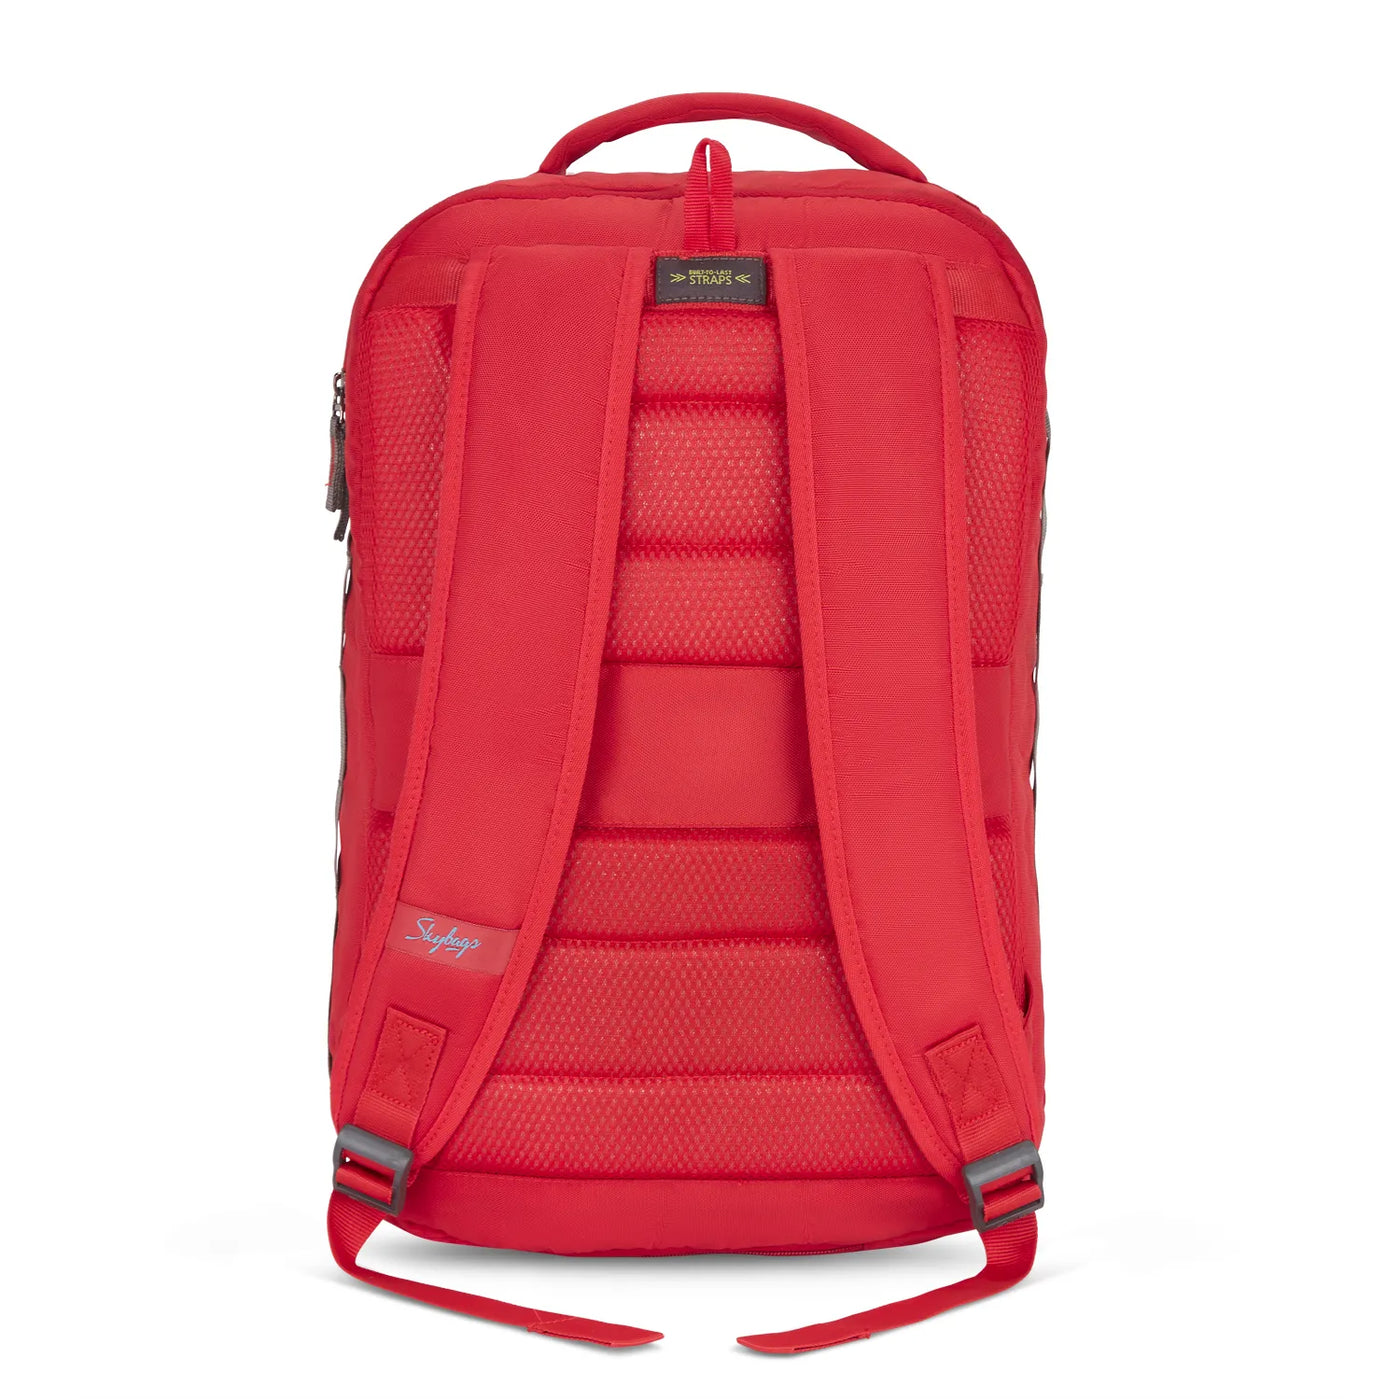 SKYBAGS OFFROADER NX "01 LAPTOP BACKPACK RED"